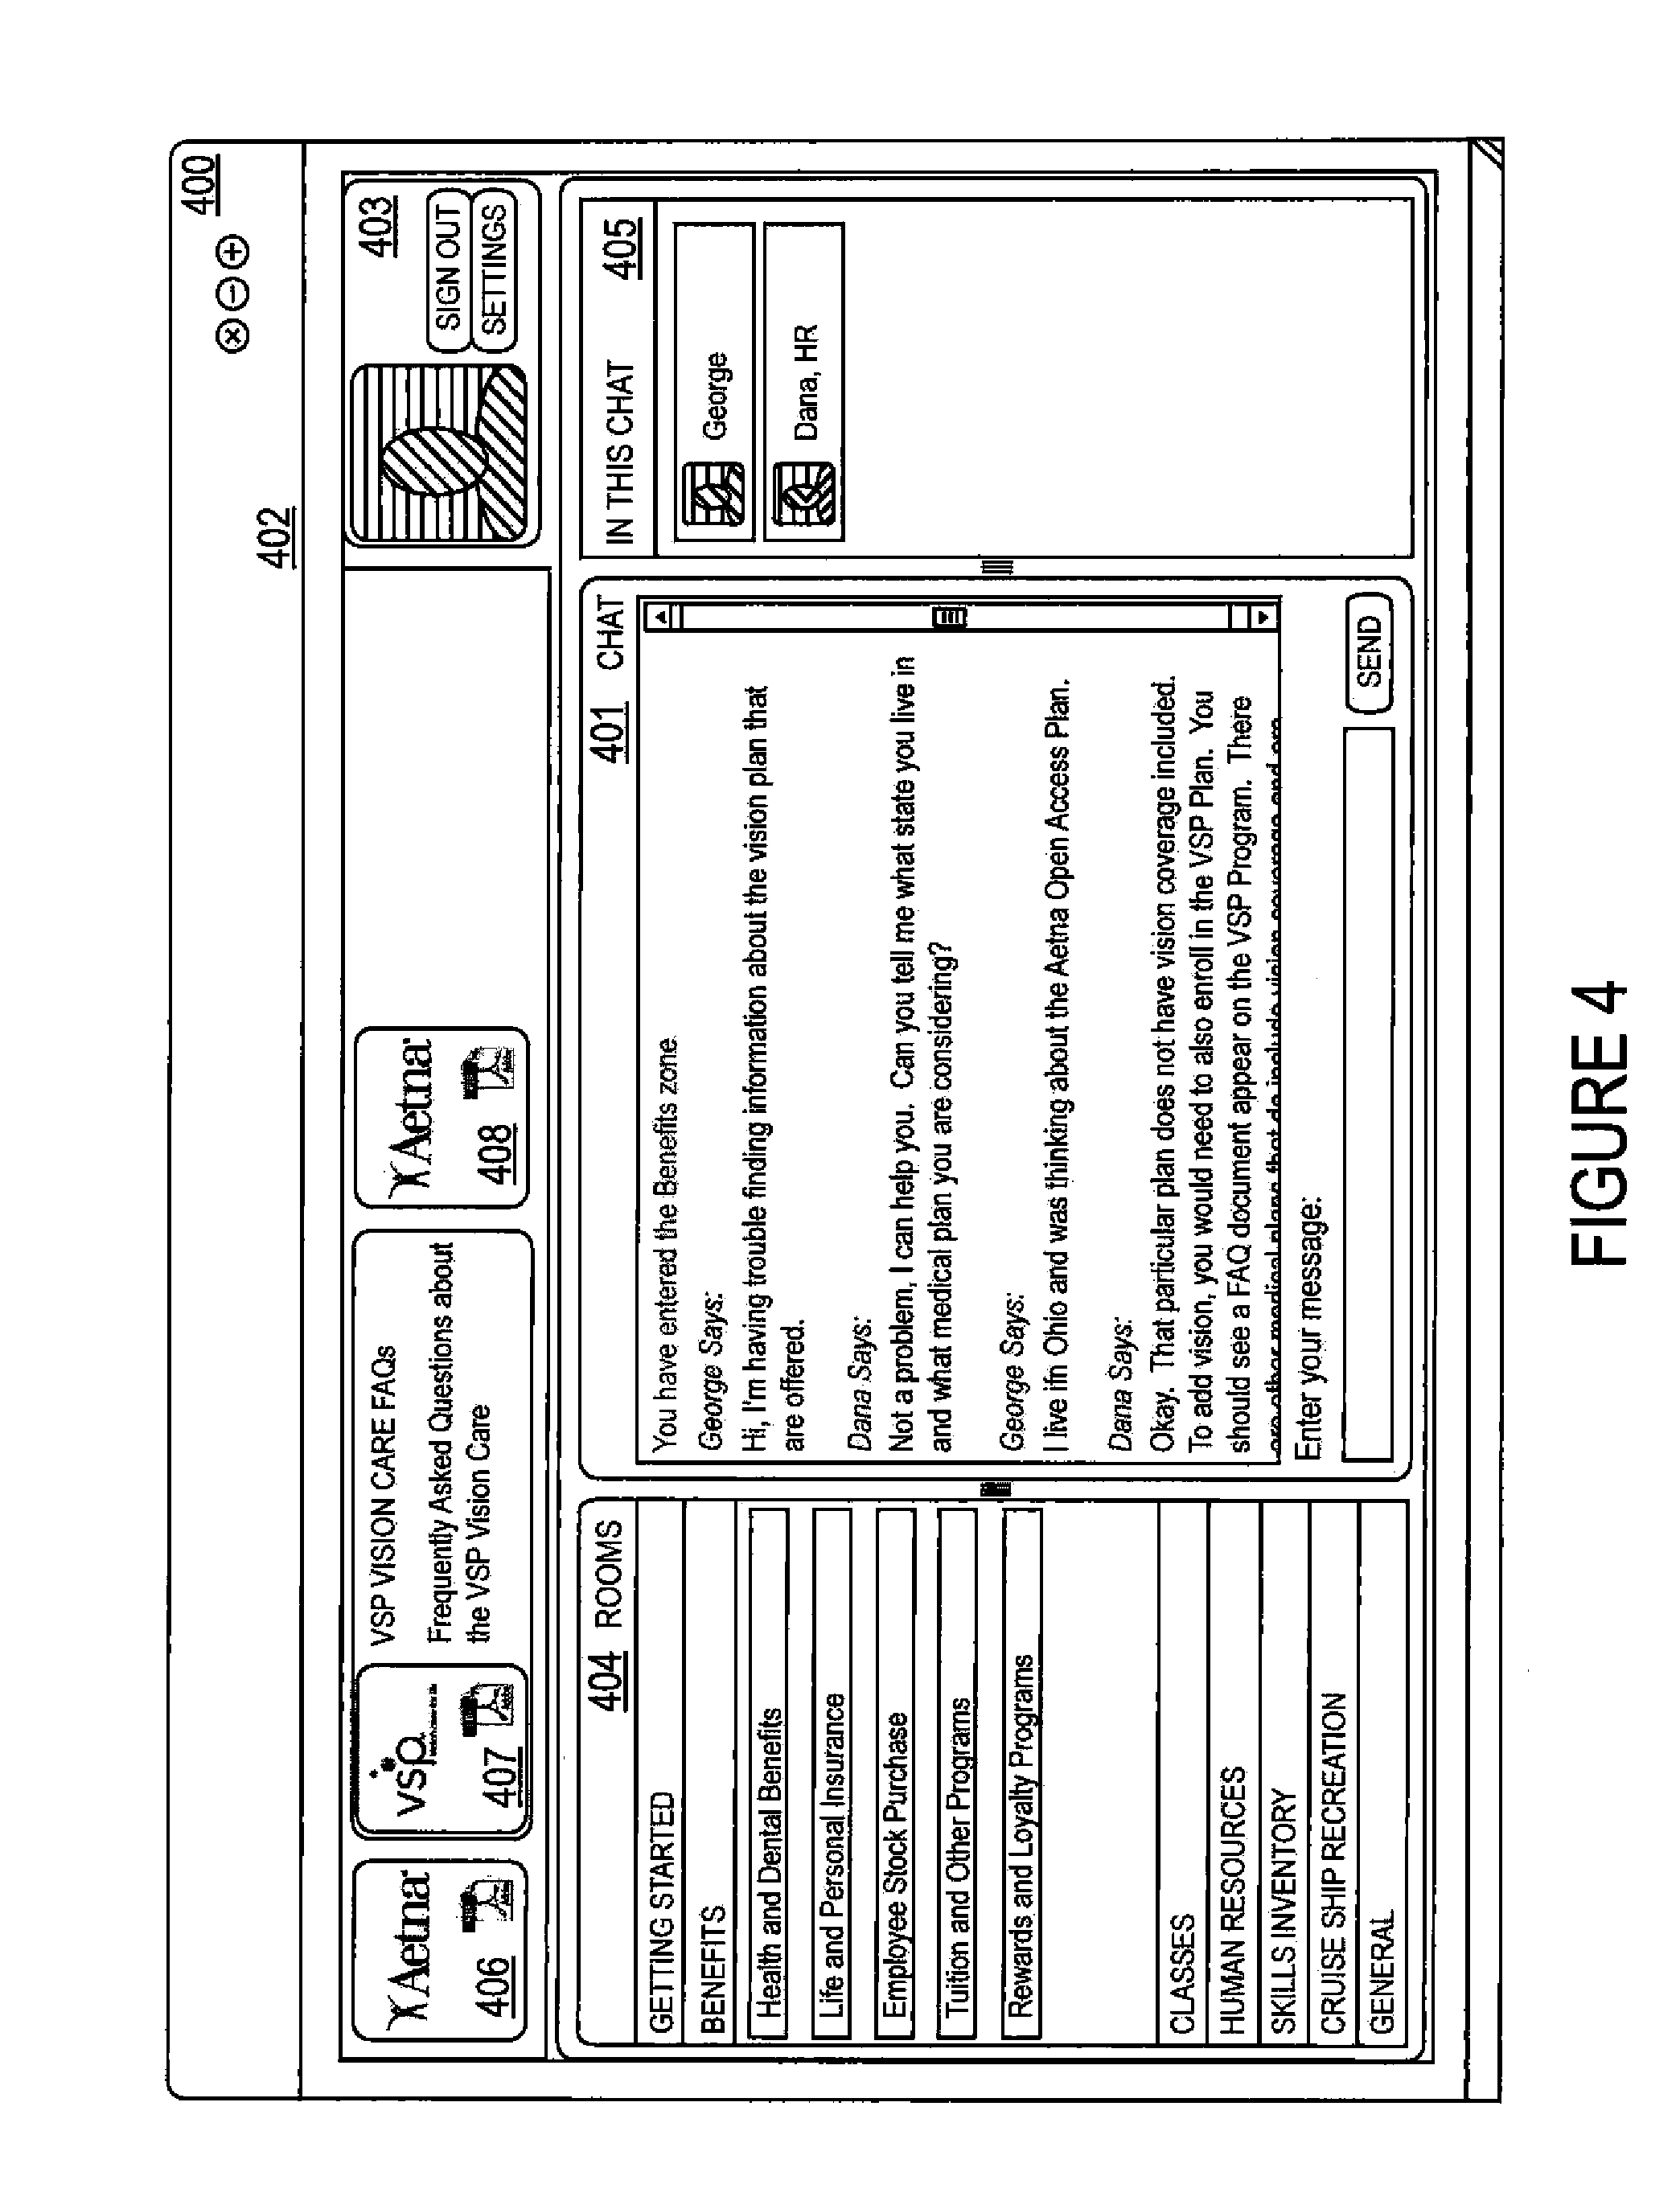 Method and apparatus for contextual based search engine and enterprise knowledge management